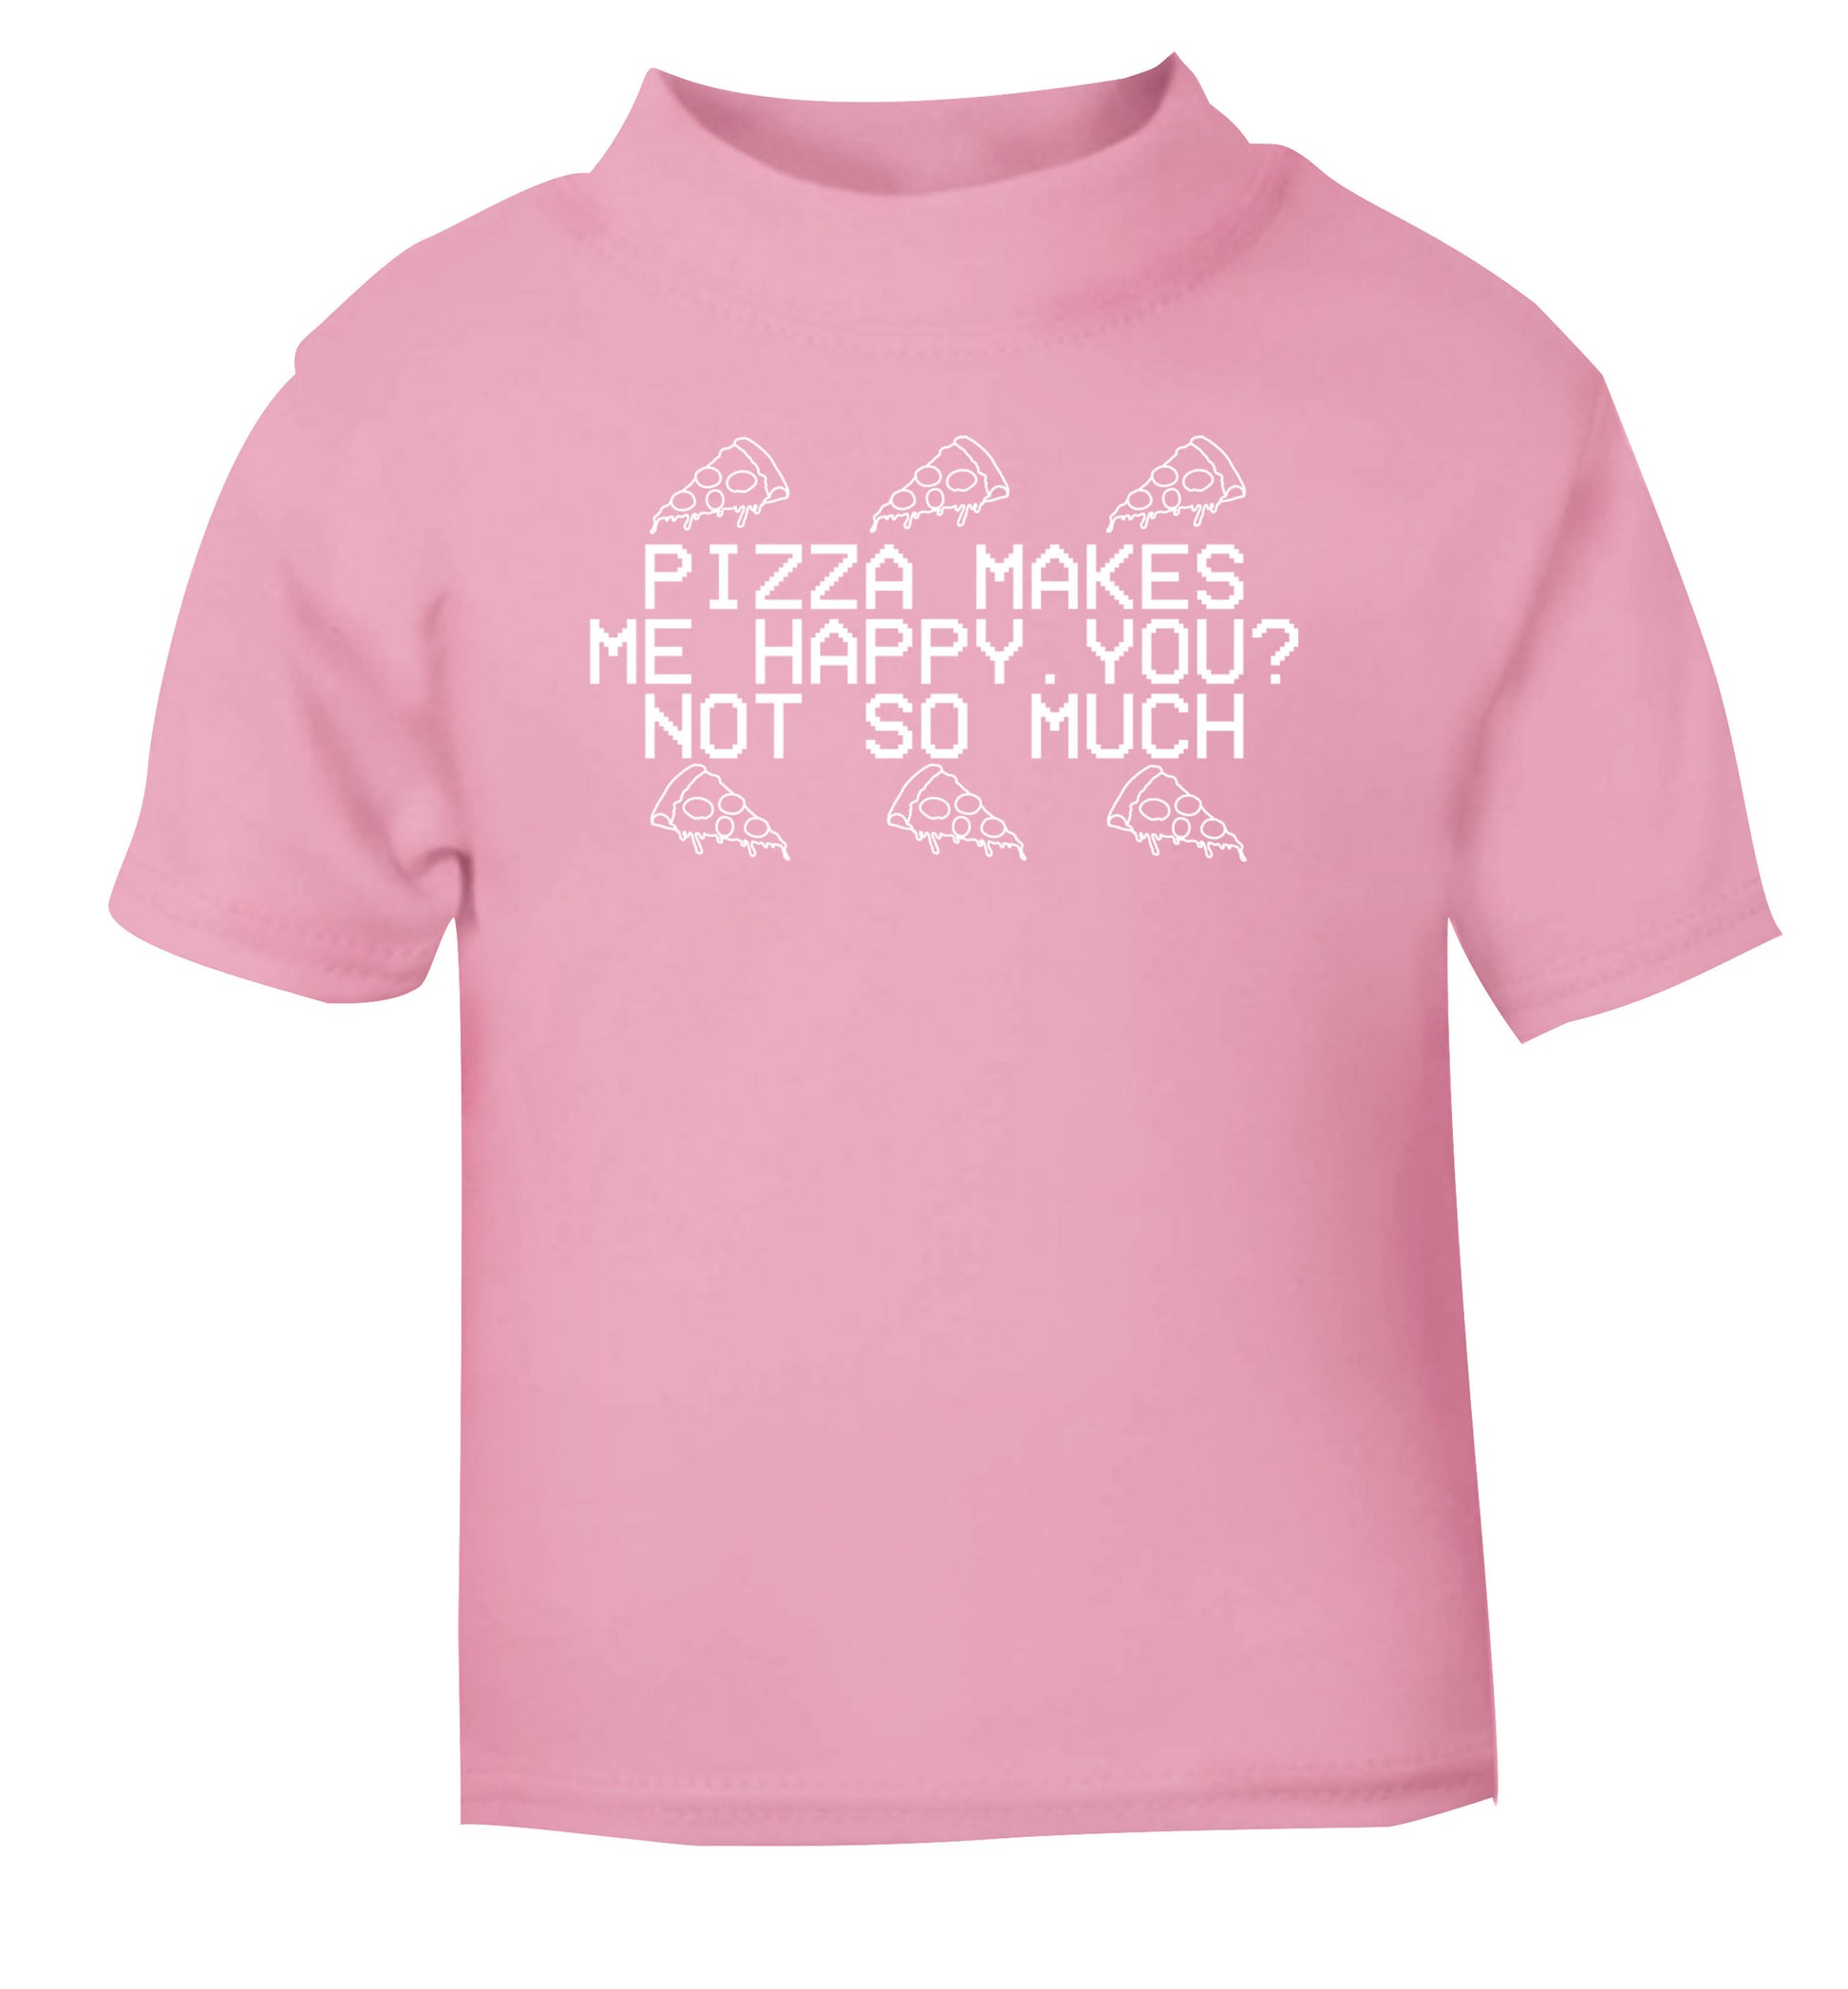 Pizza makes me happy, You? Not so much light pink Baby Toddler Tshirt 2 Years